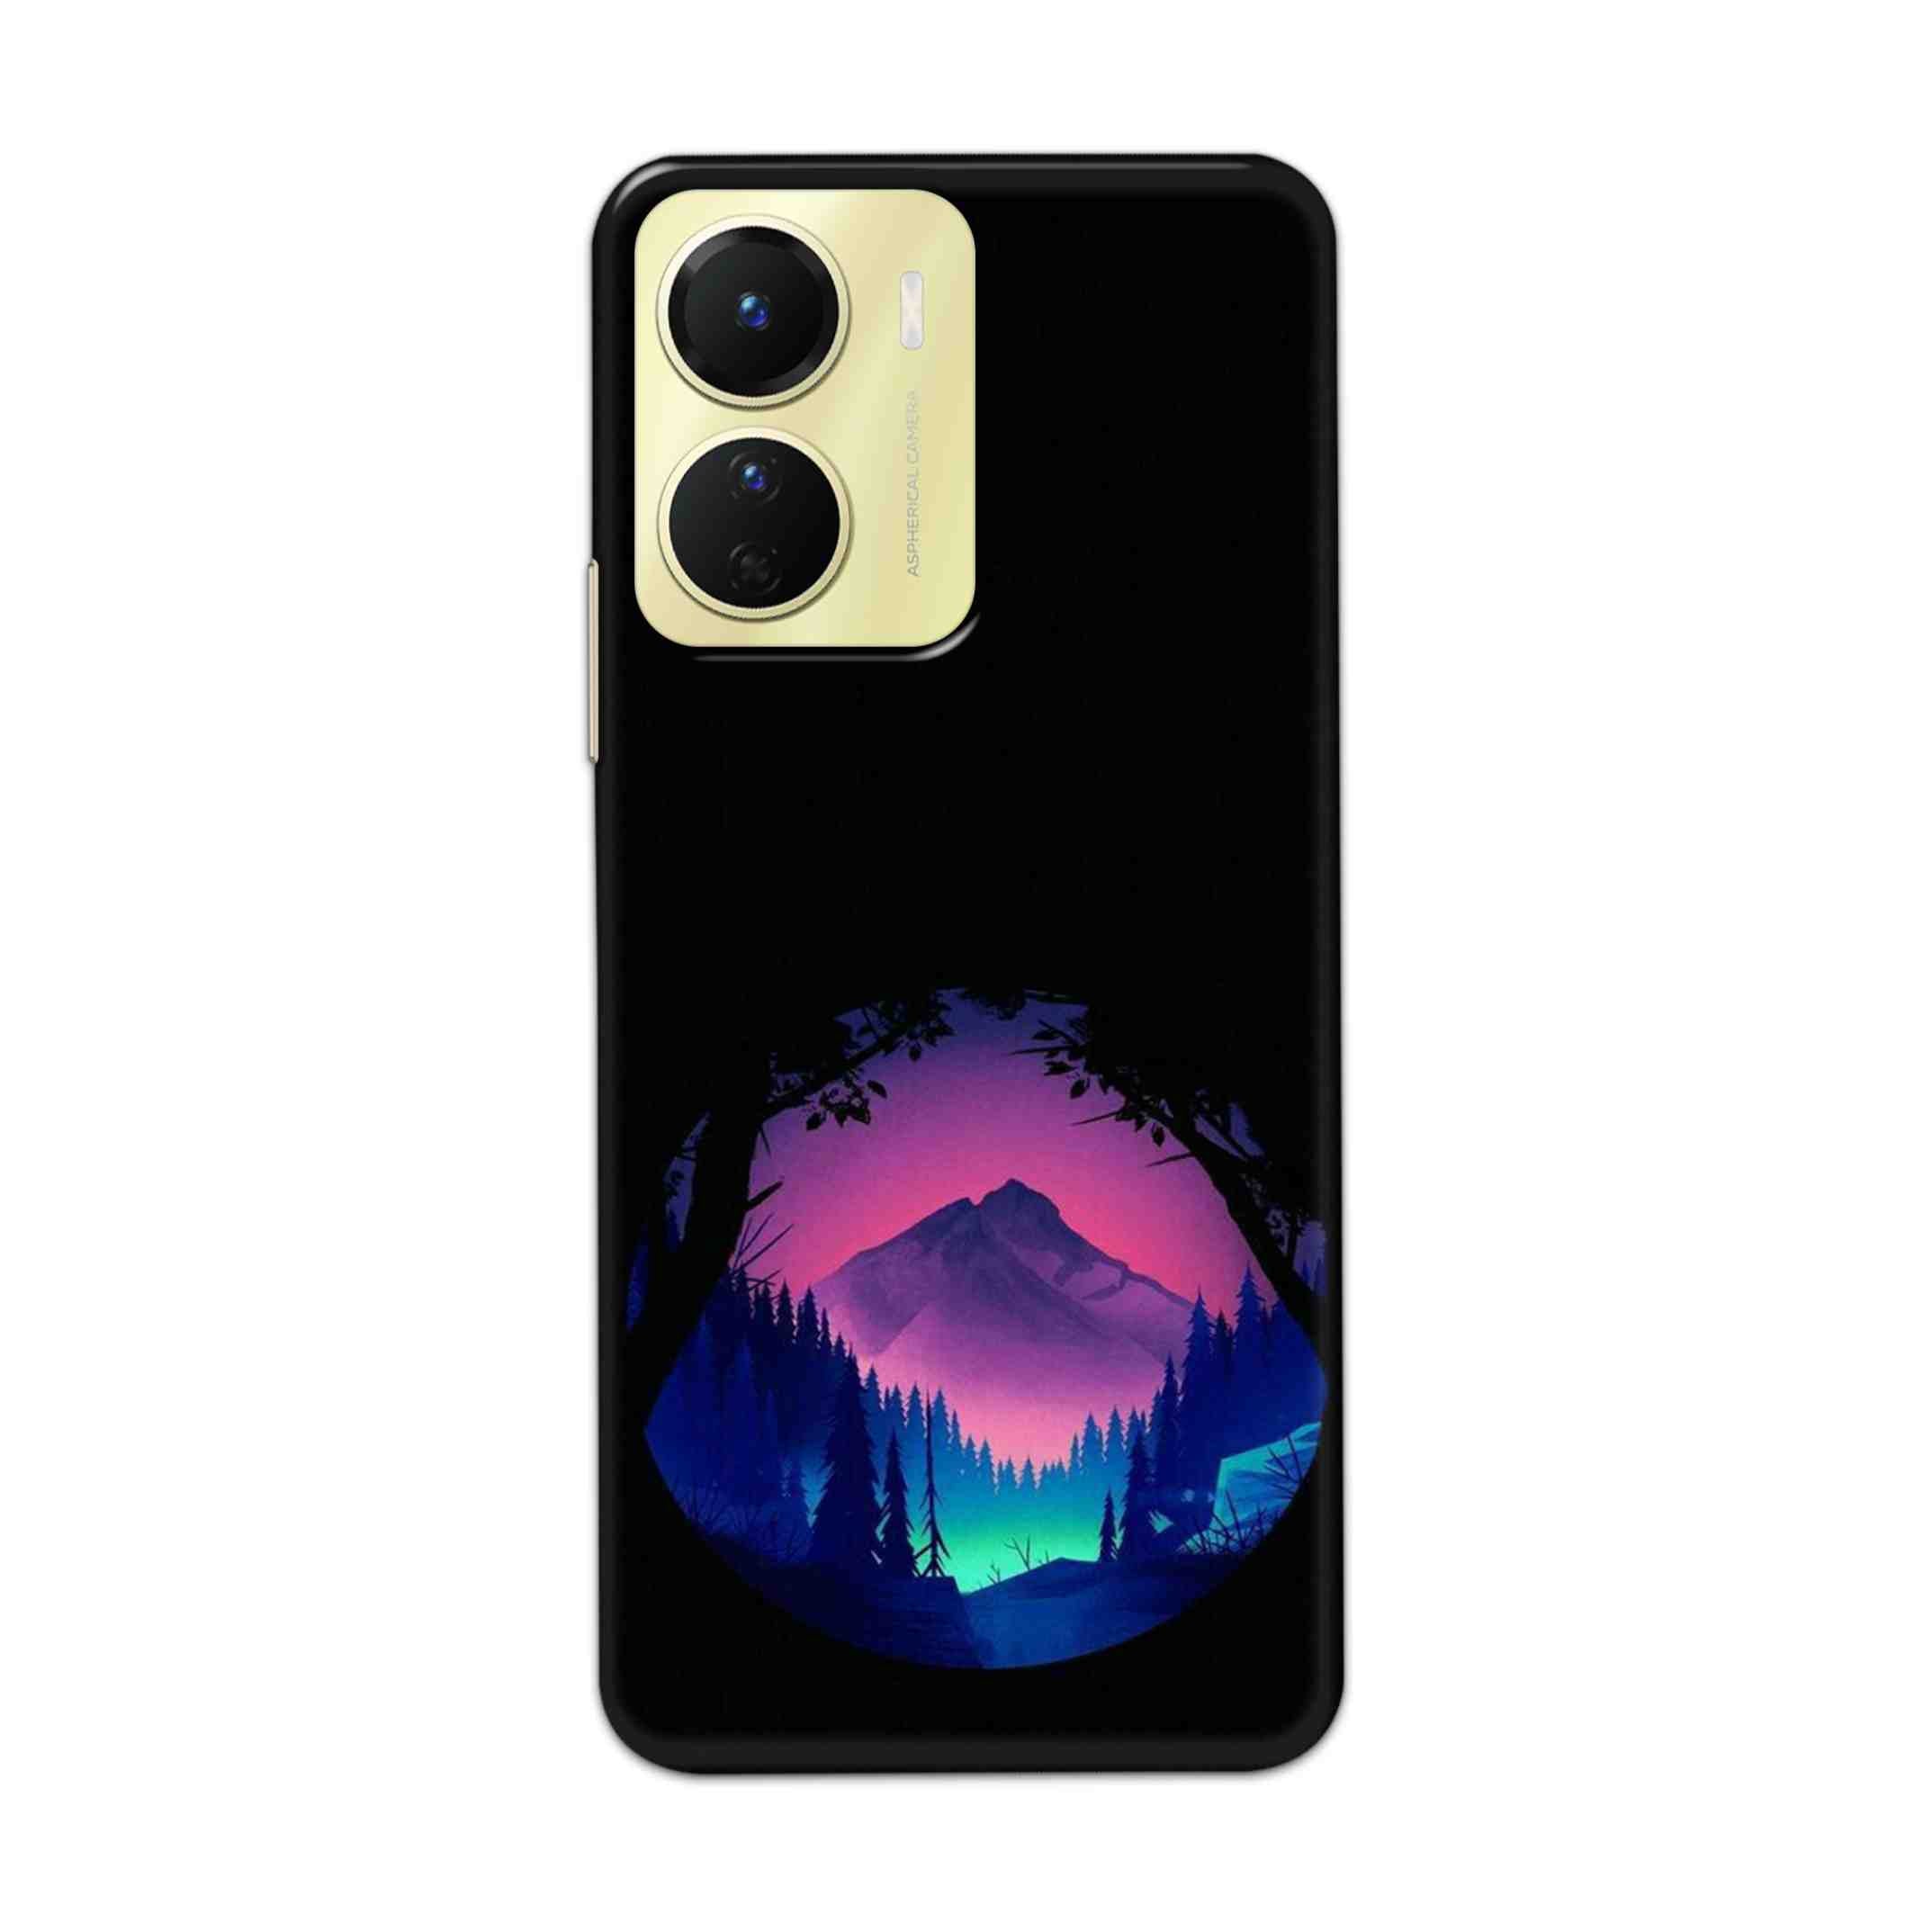 Buy Neon Tables Hard Back Mobile Phone Case Cover For Vivo Y16 Online